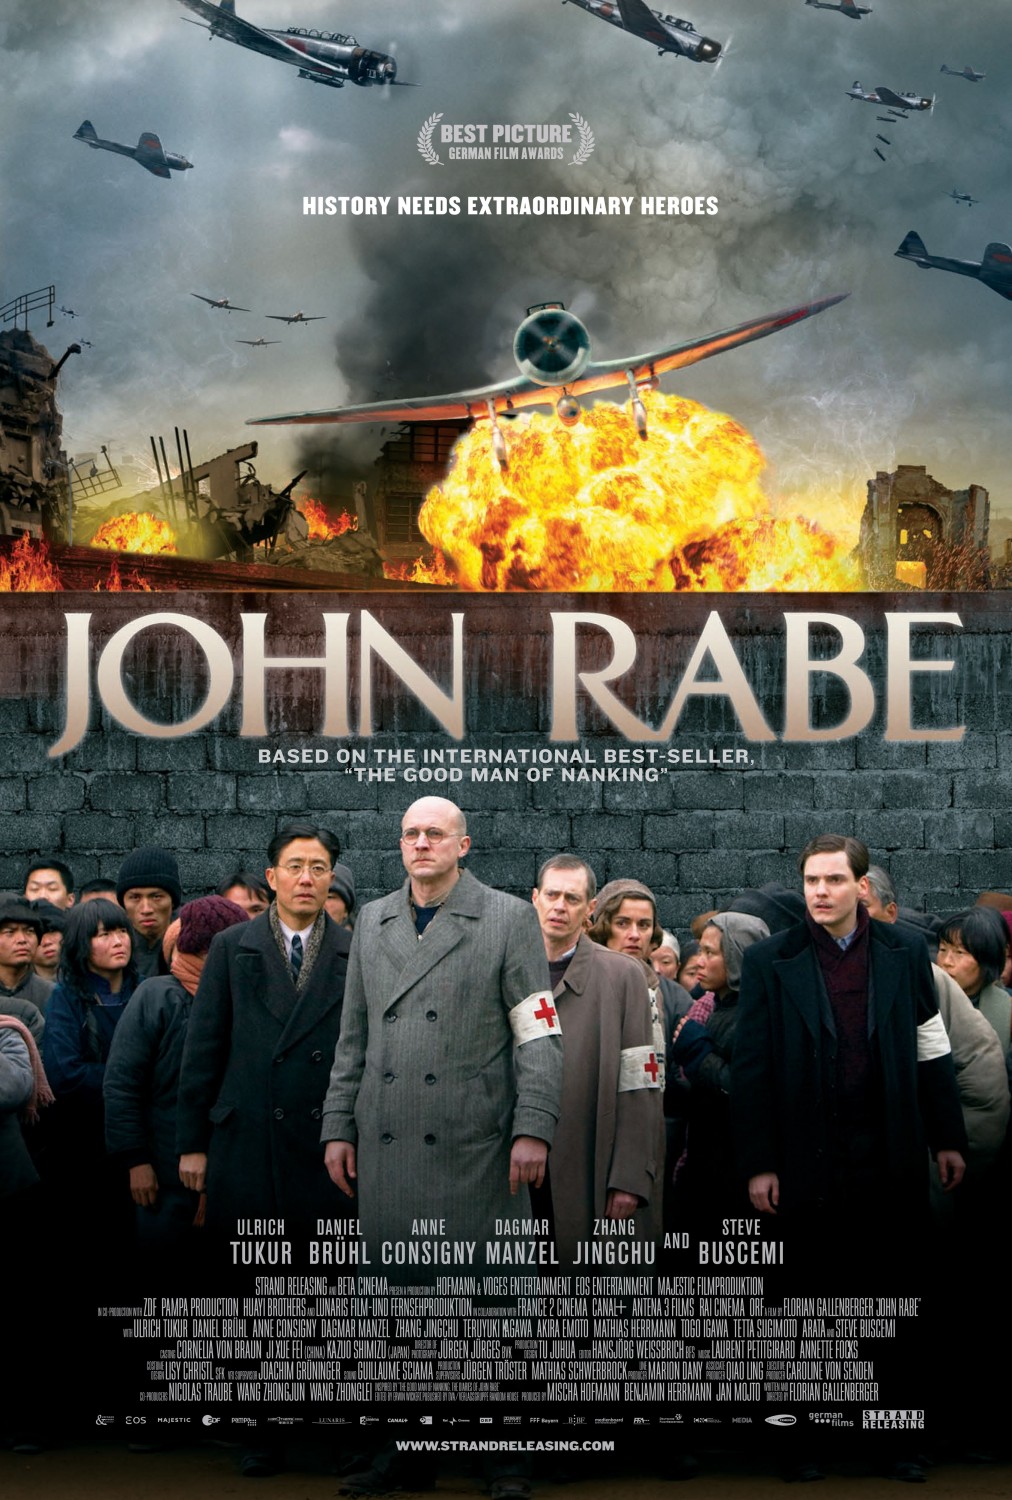 Extra Large Movie Poster Image for John Rabe (#2 of 5)